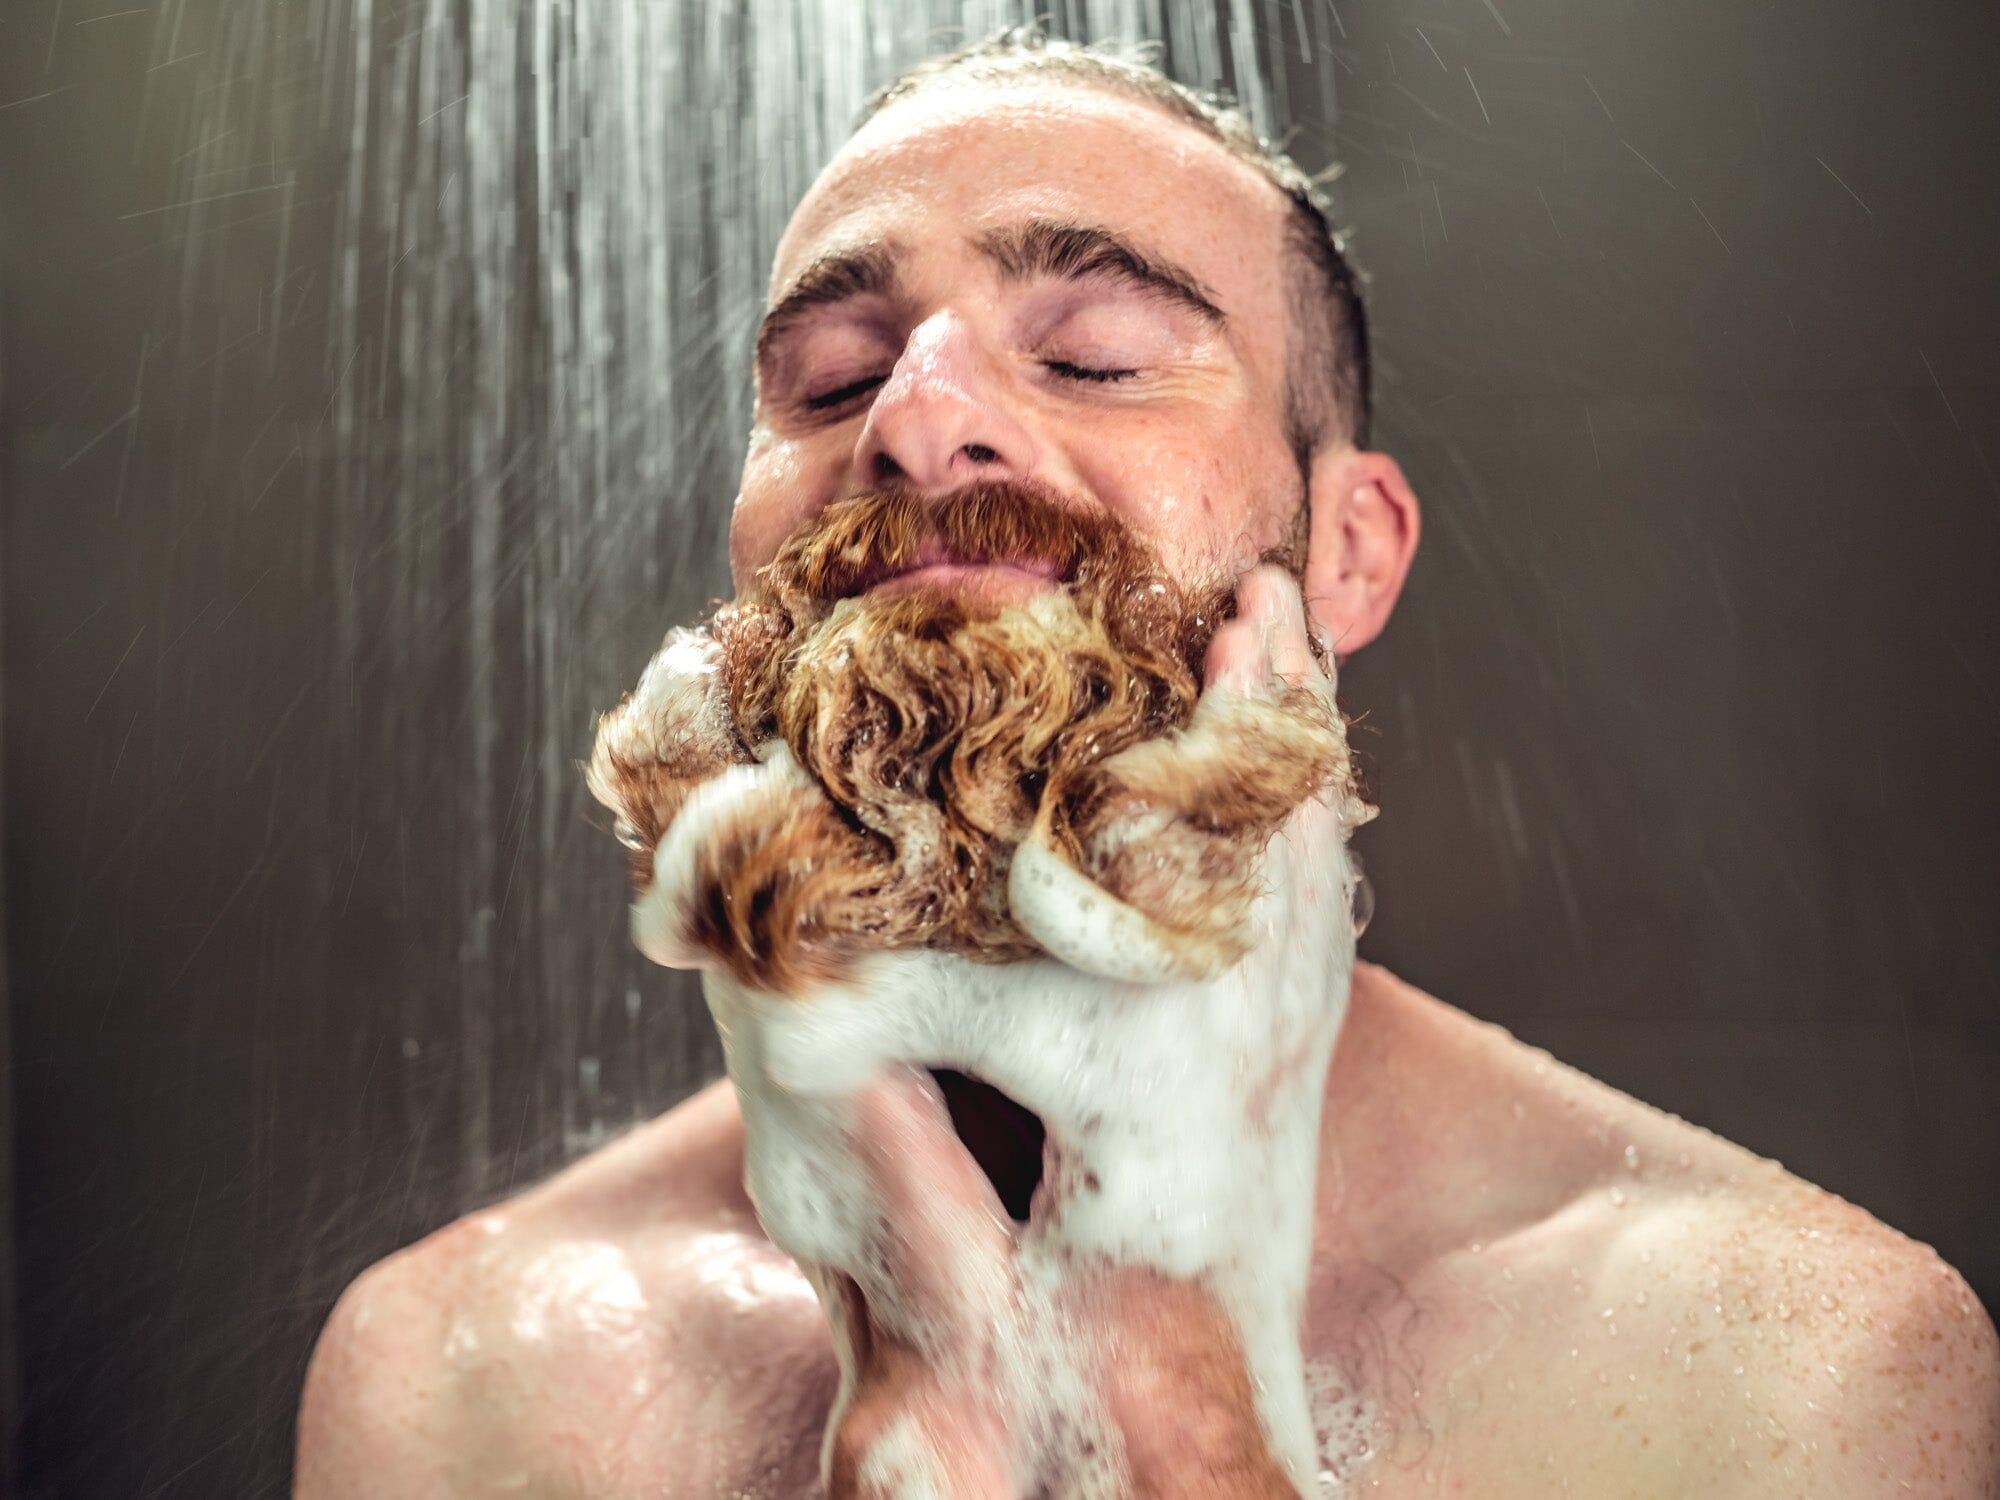 Washing Your Beard is Healthier Than You Think